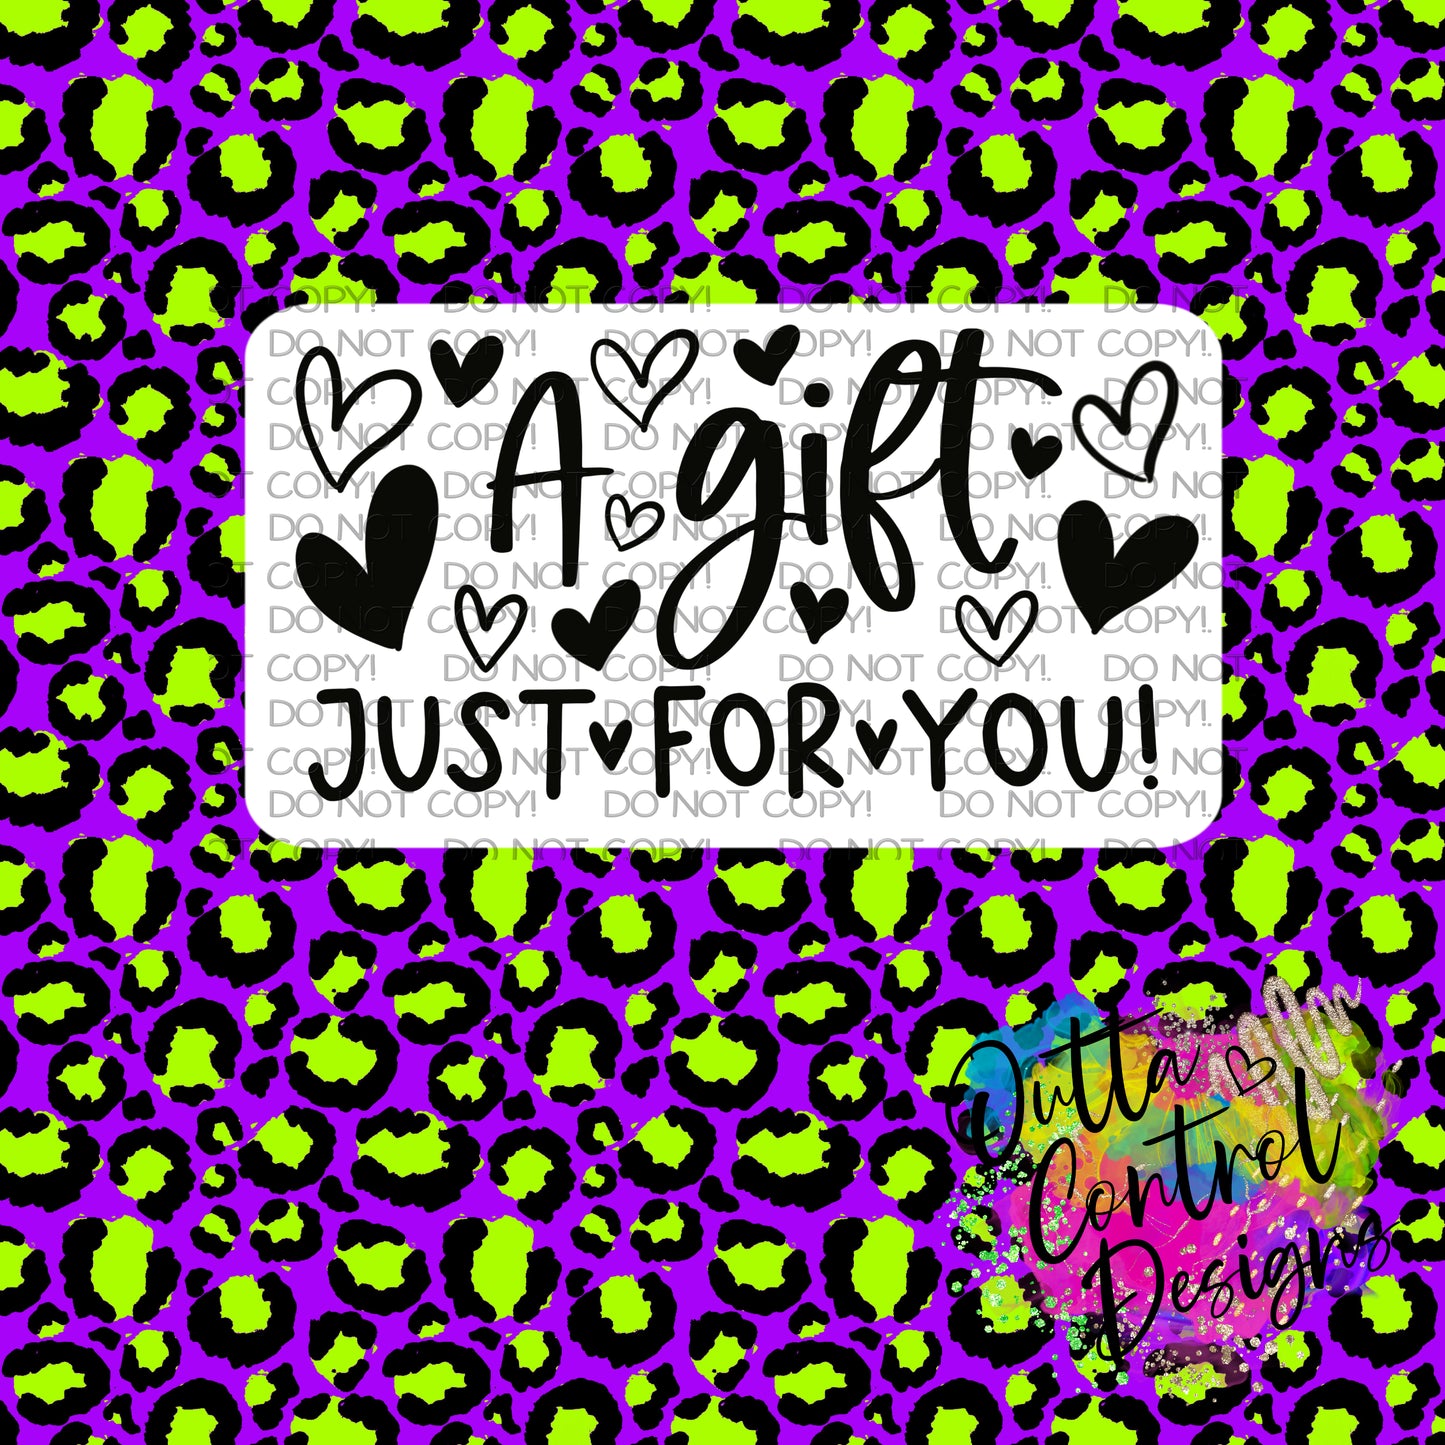 A gift just for you Thermal Sticker (25 per order)